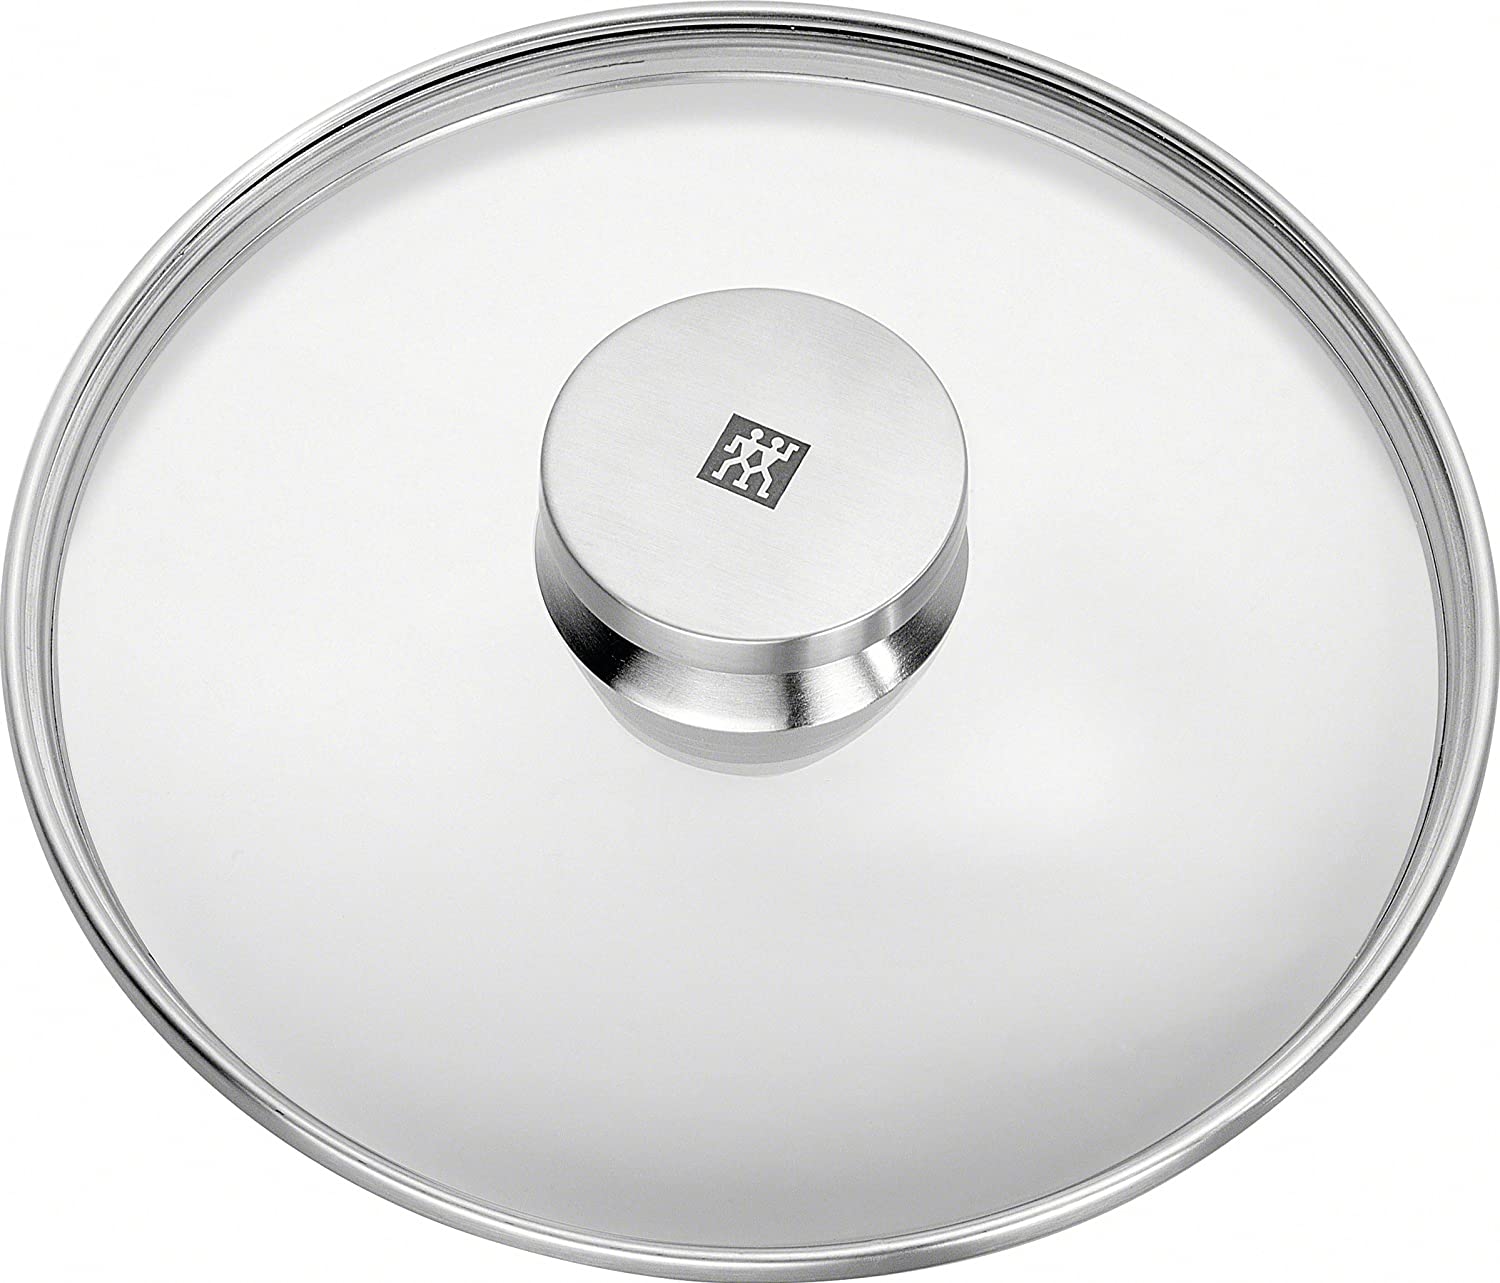 Zwilling 40990-916-0 lid, stainless steel, ø16 cm